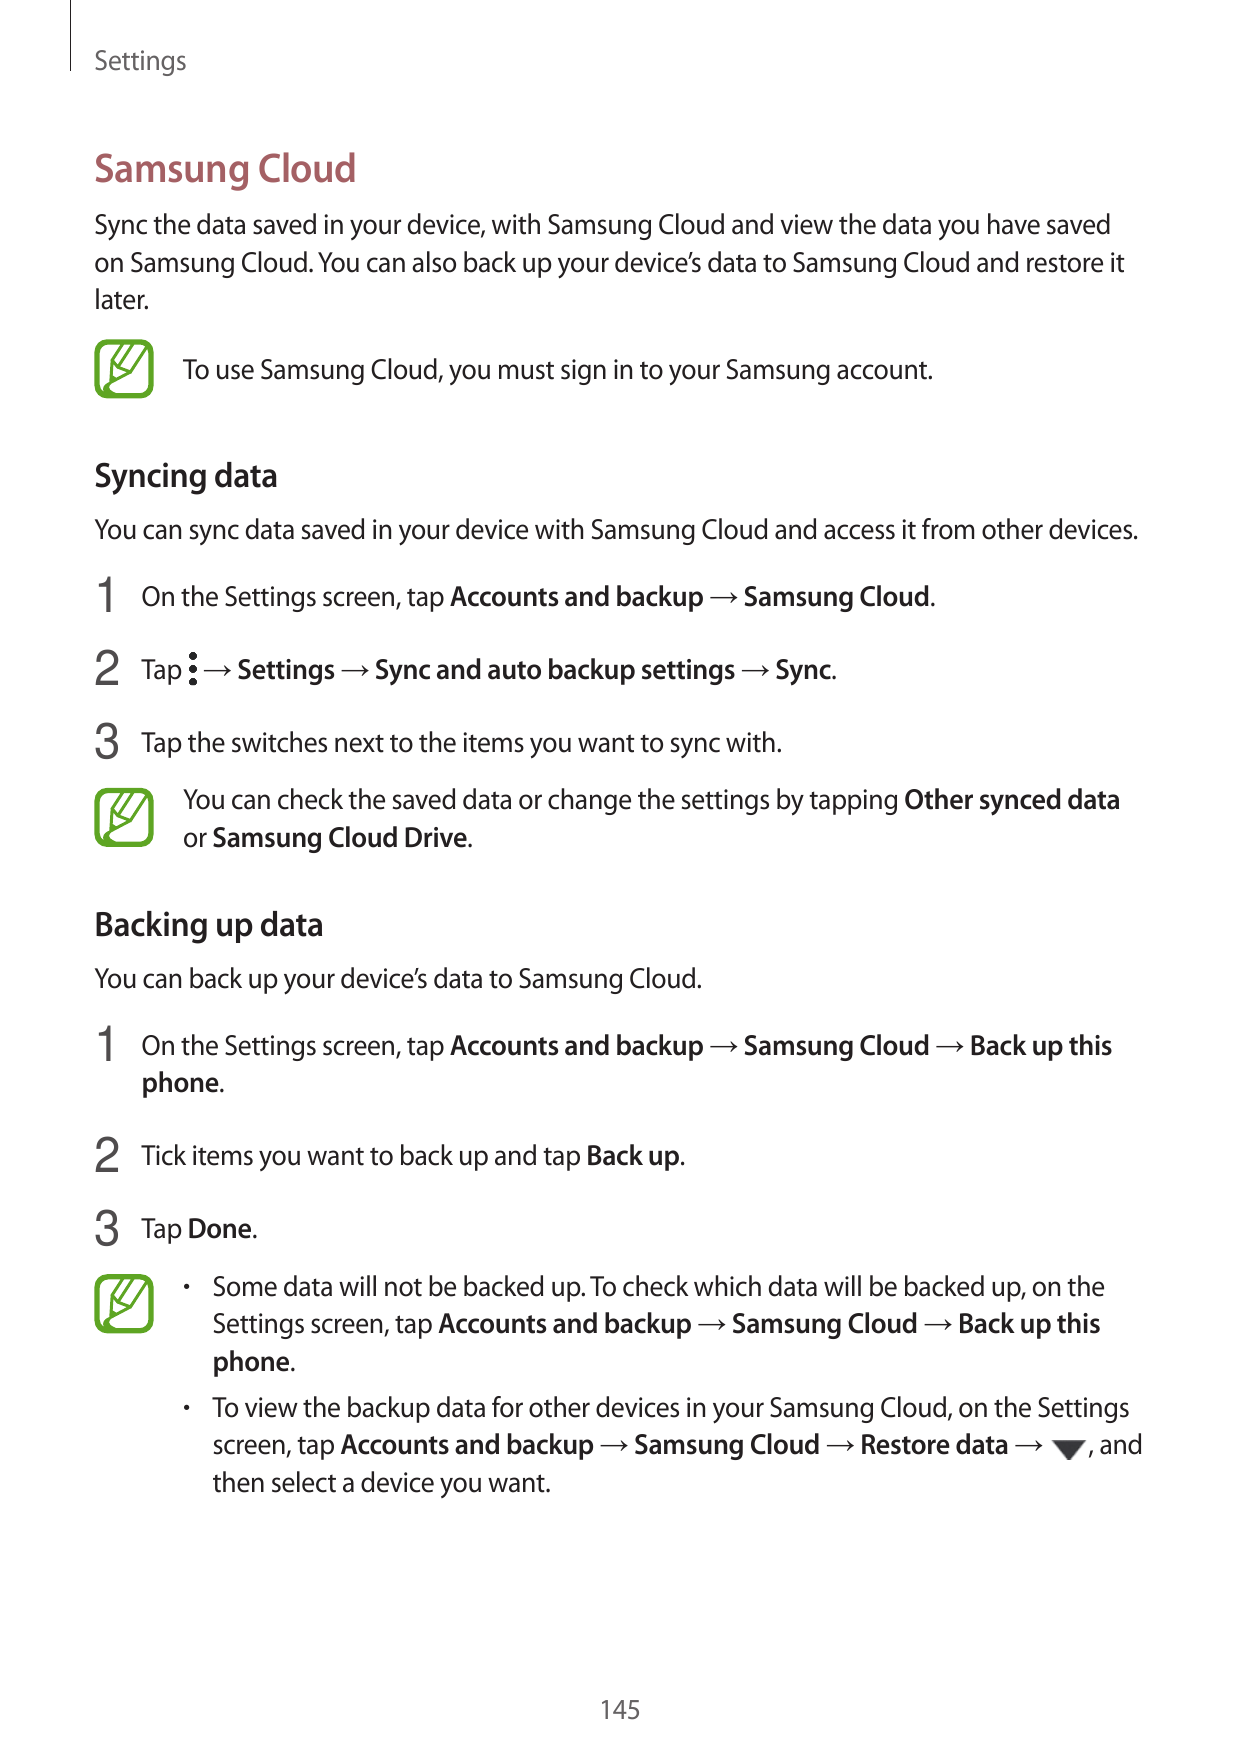 SettingsSamsung CloudSync the data saved in your device, with Samsung Cloud and view the data you have savedon Samsung Cloud. Yo